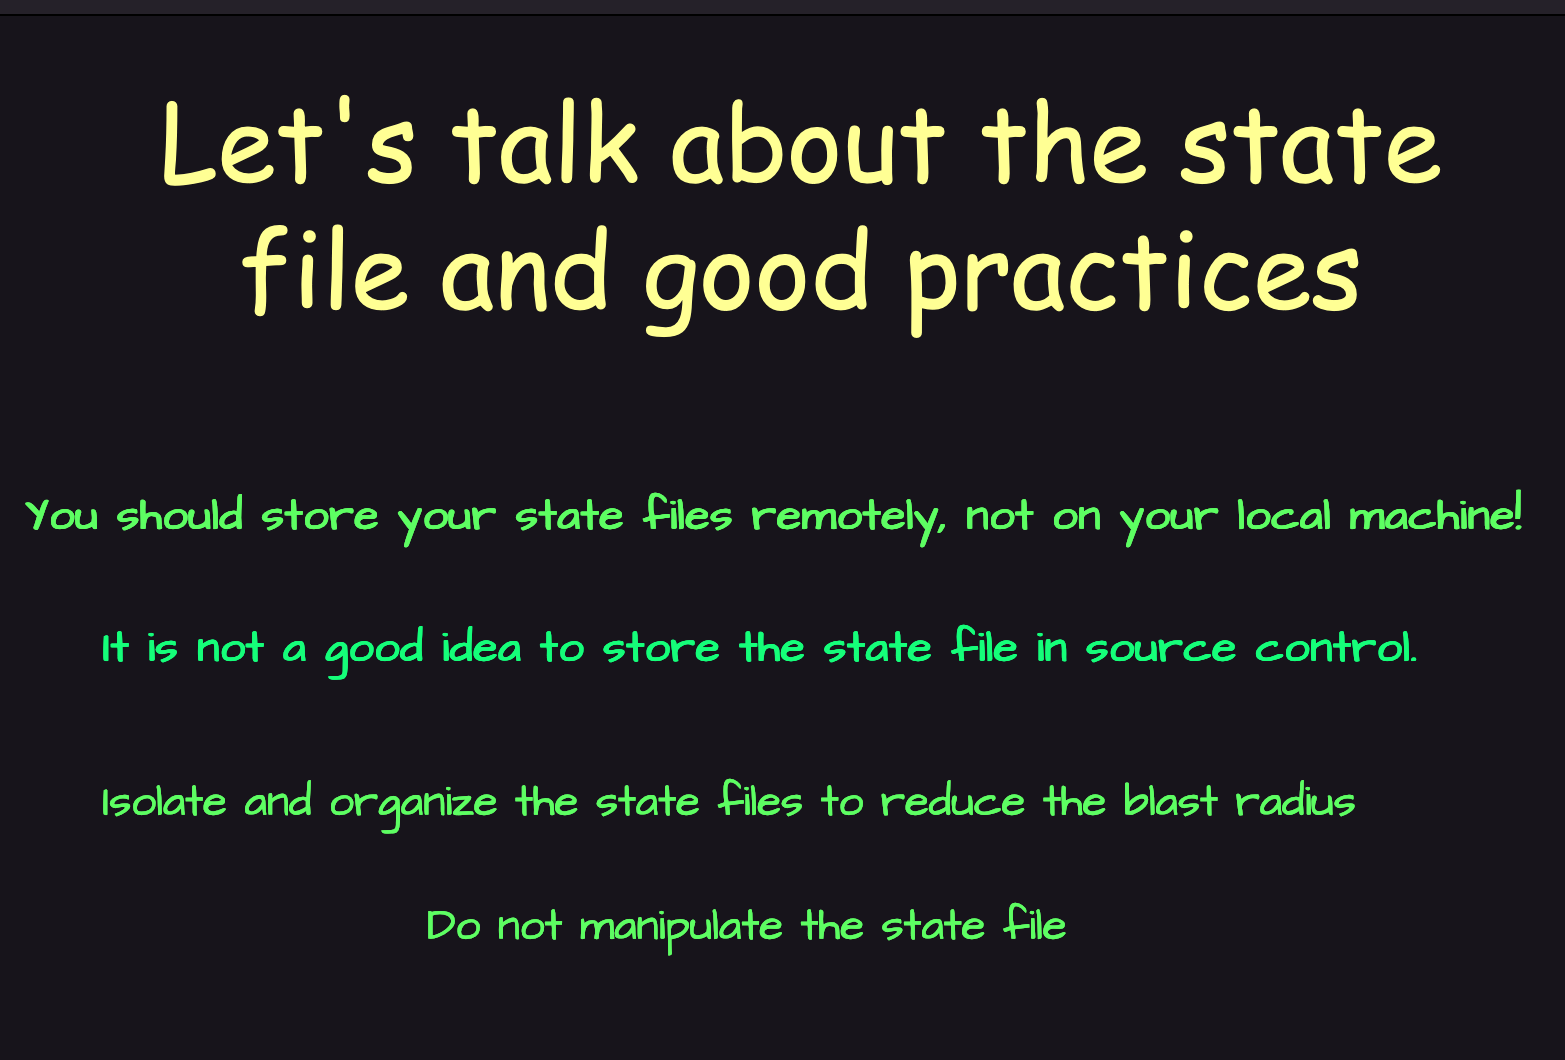 State file Good Practices